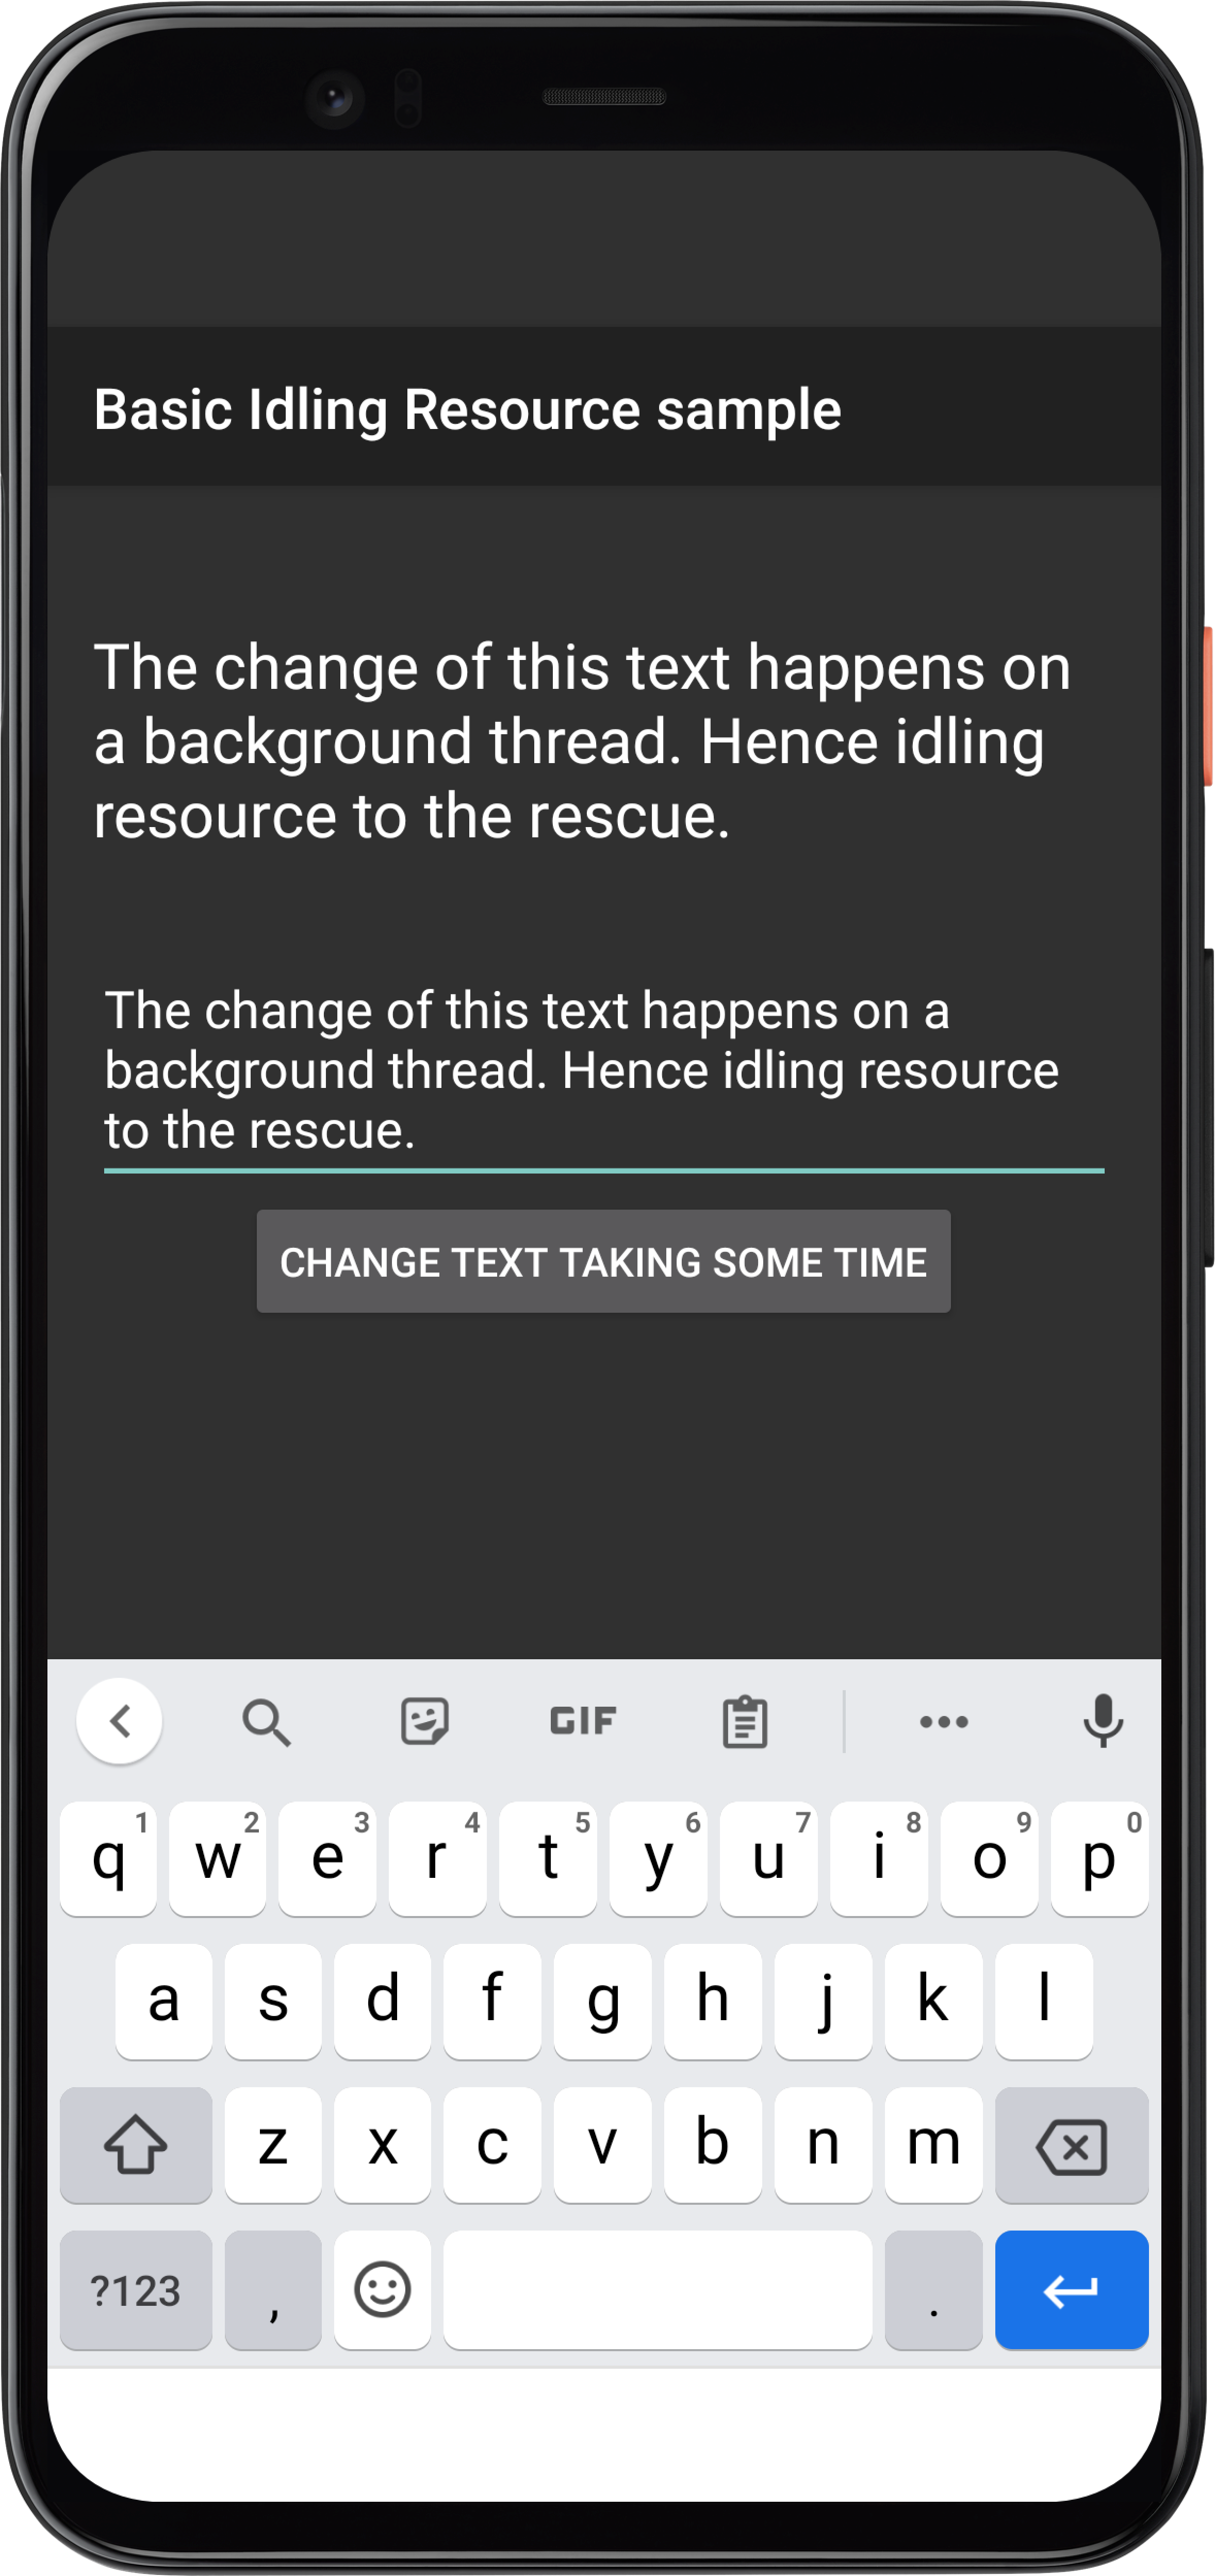 THEN app displays entered text in TextView with id: textToBeChanged